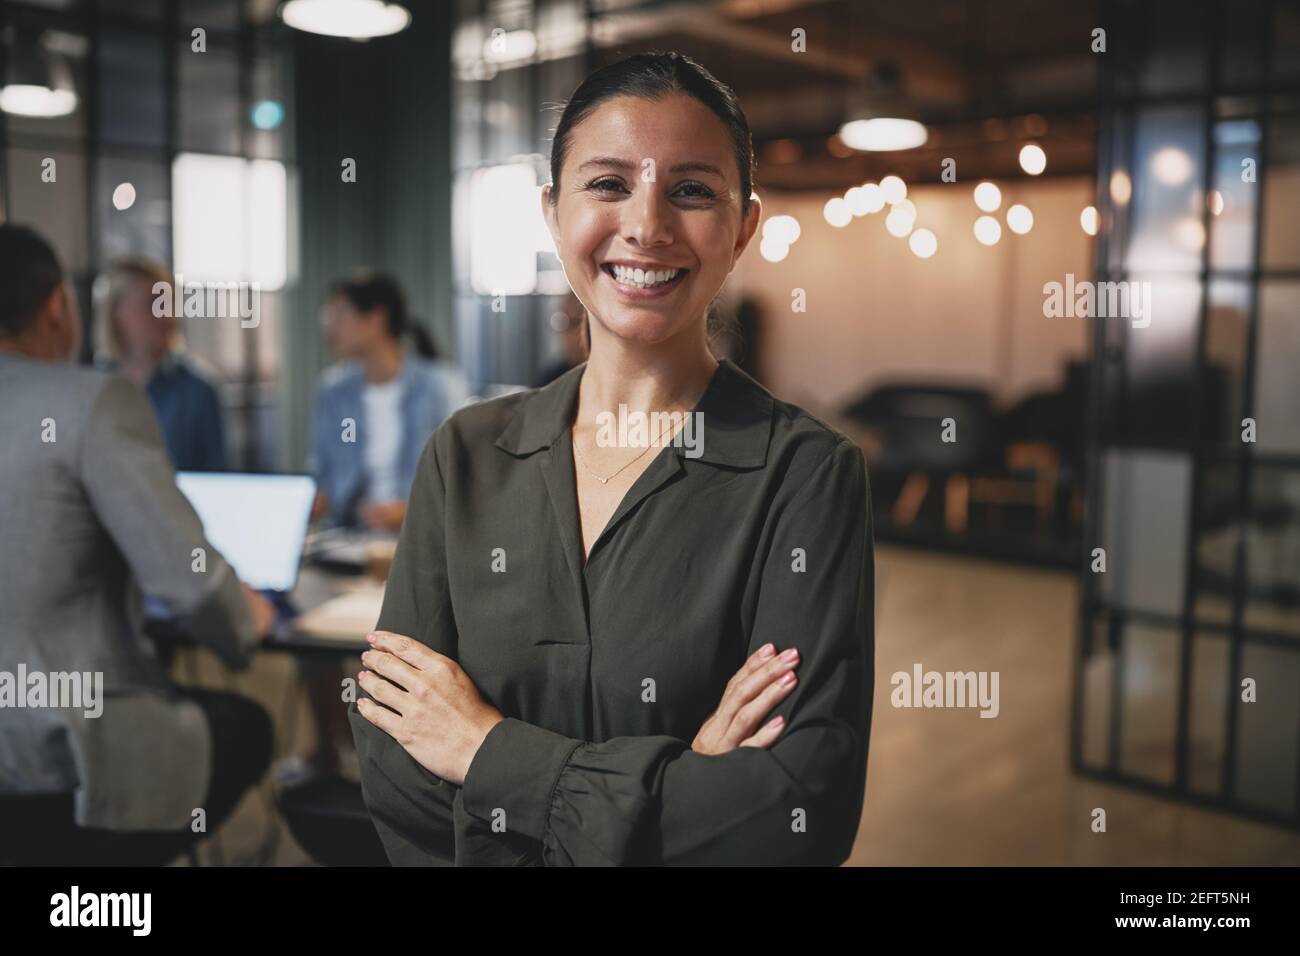 Young businesswoman smiling while sitting in an office with coworkers working together in the background Stock Photo